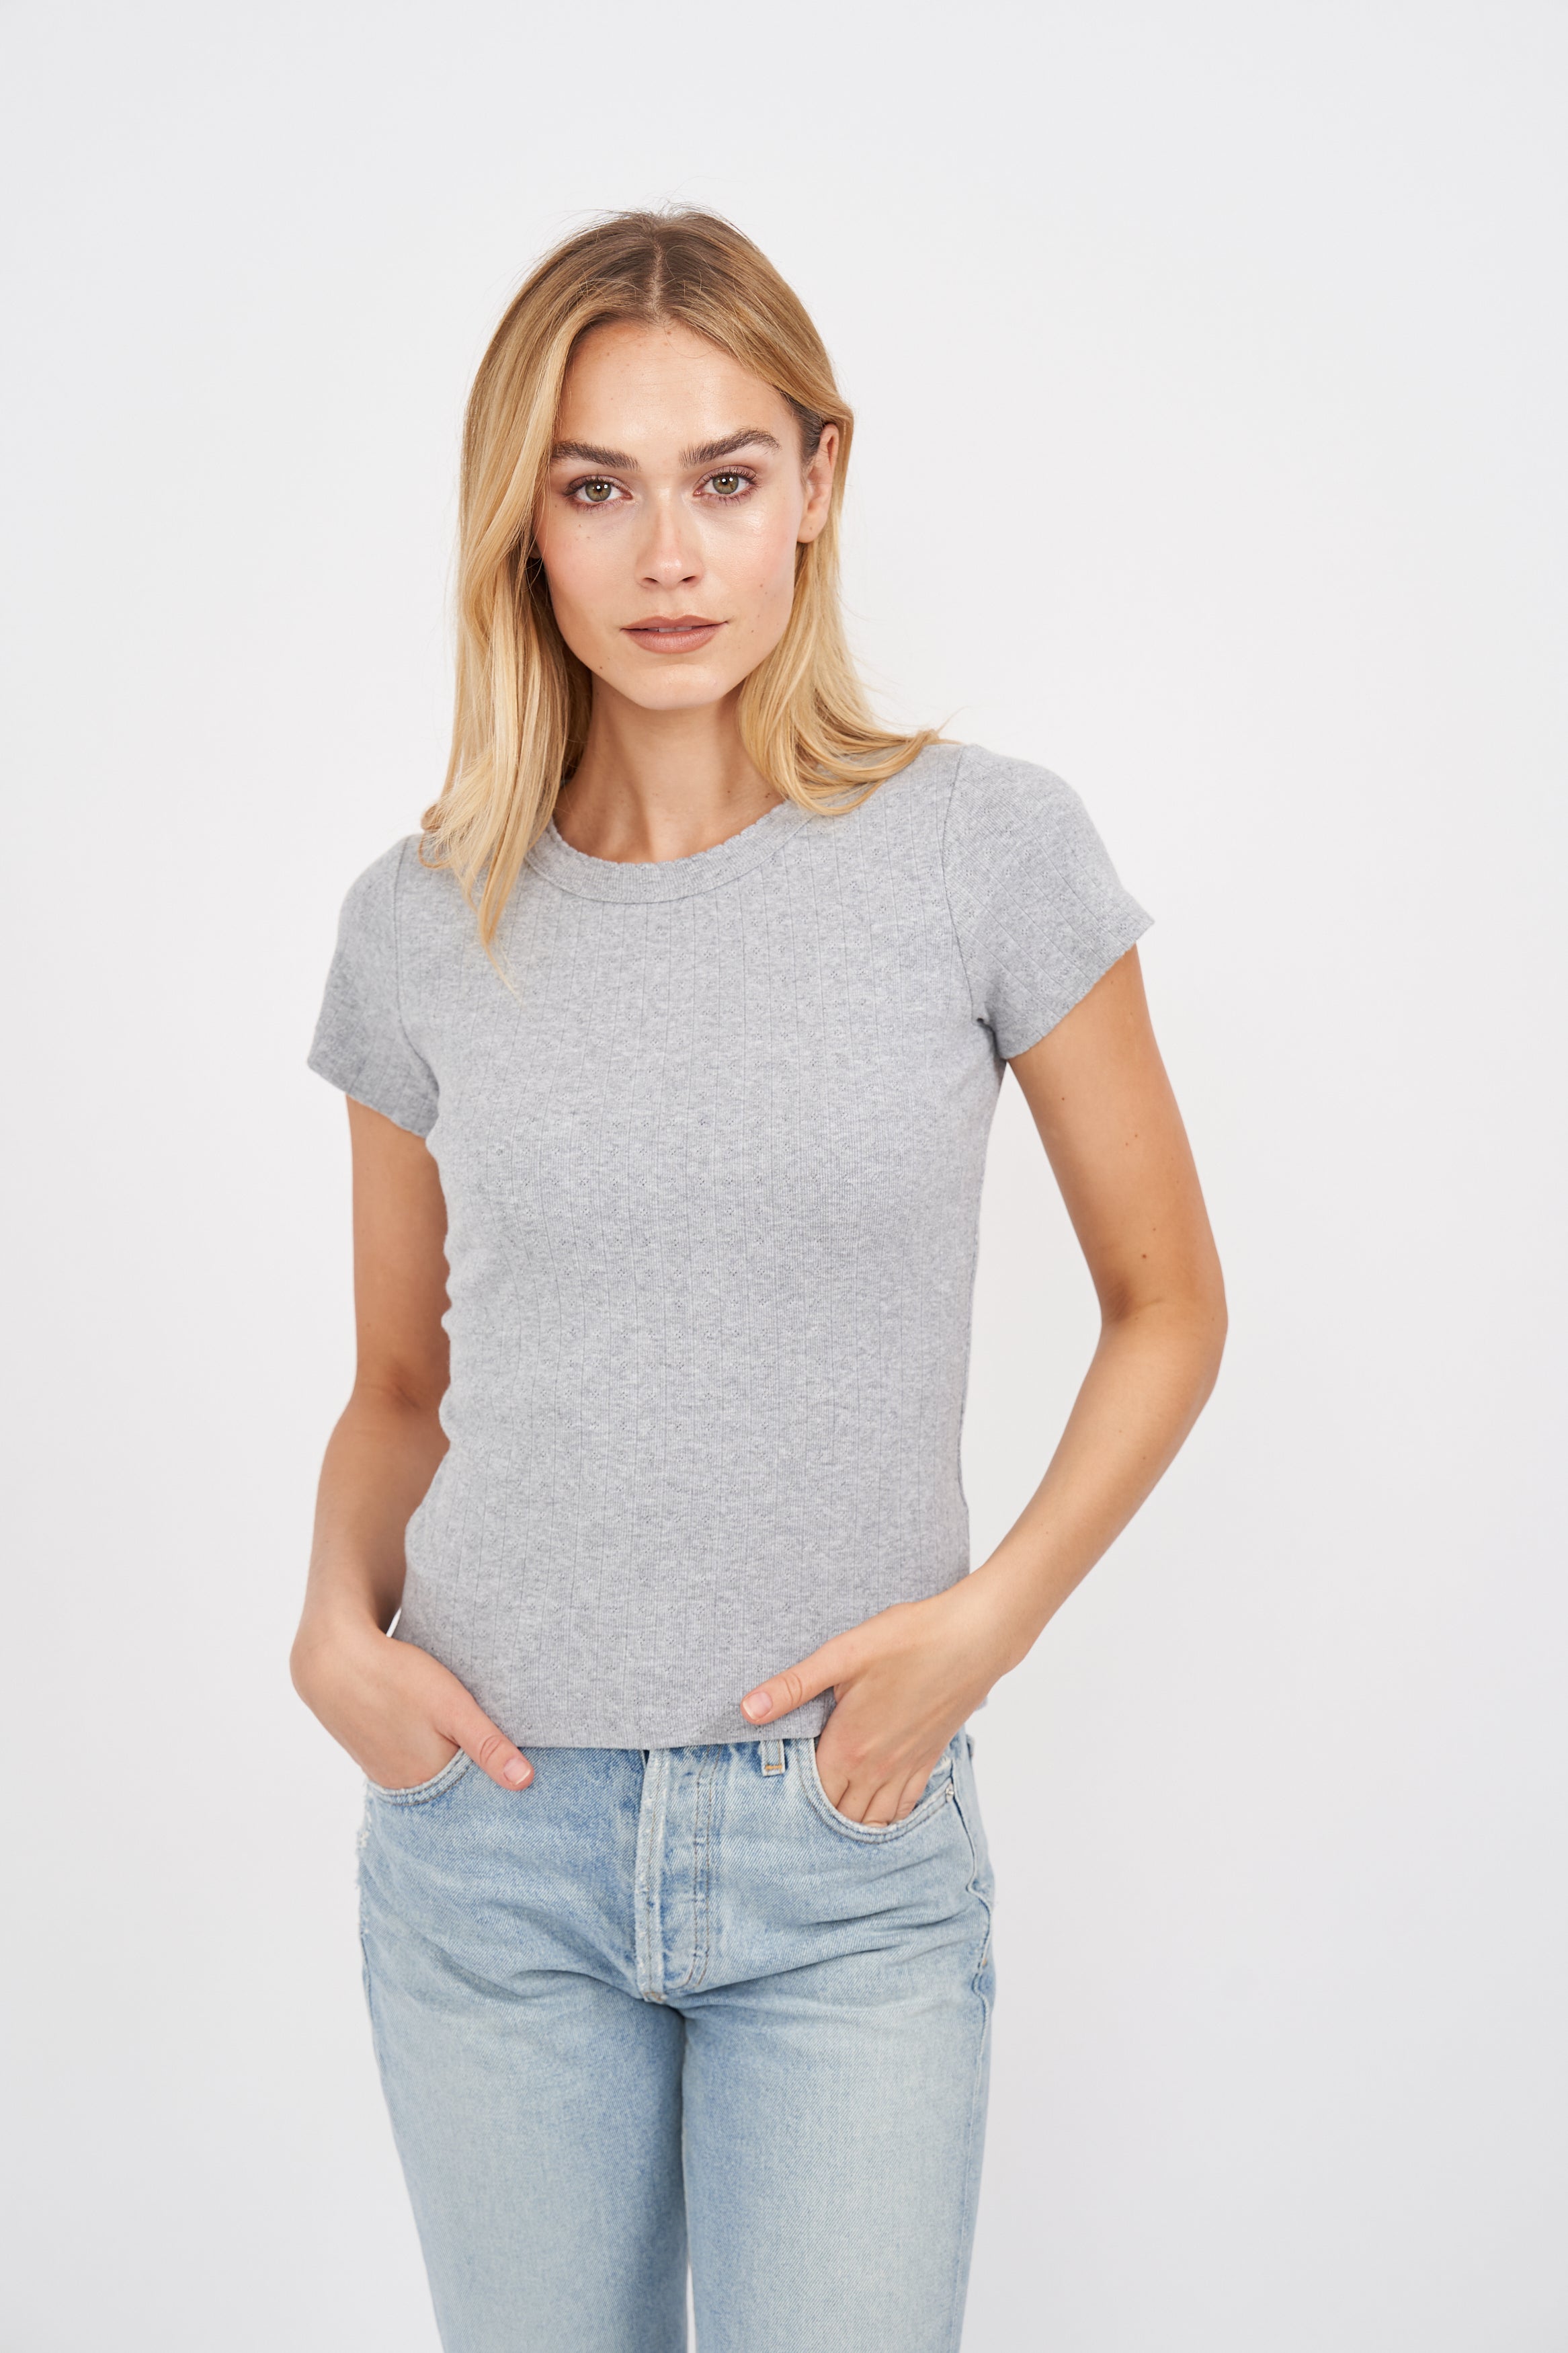 Pointelle Tee in Sea Glass – Darling Clementine